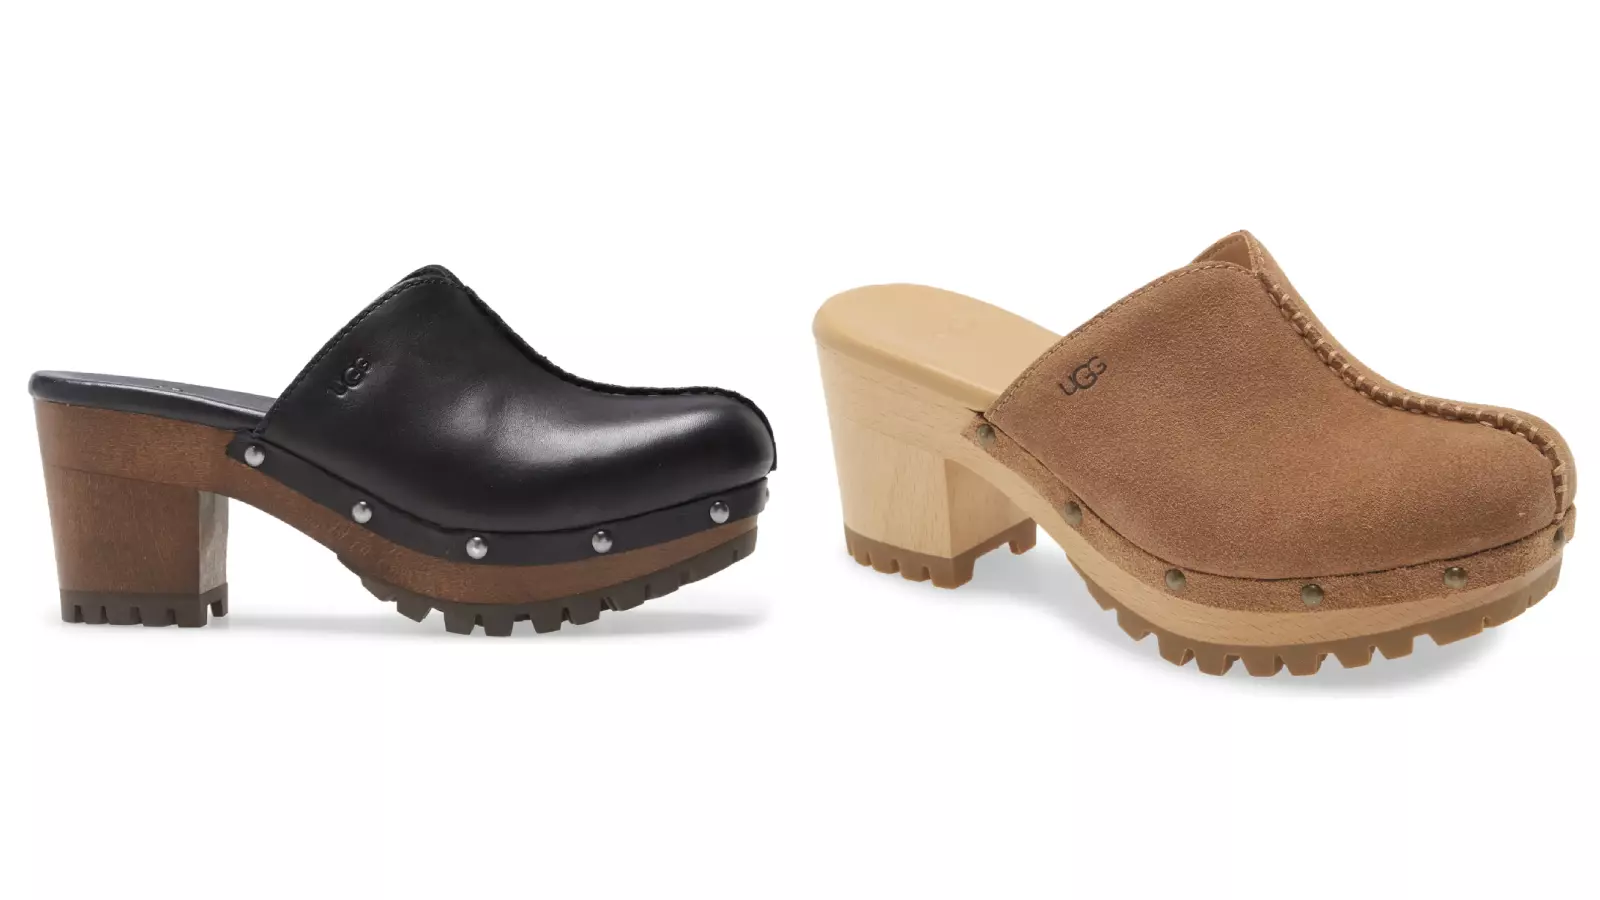 Ugg makes a clog that gives you the comfort of a boot with the style and sophistication of a heel.